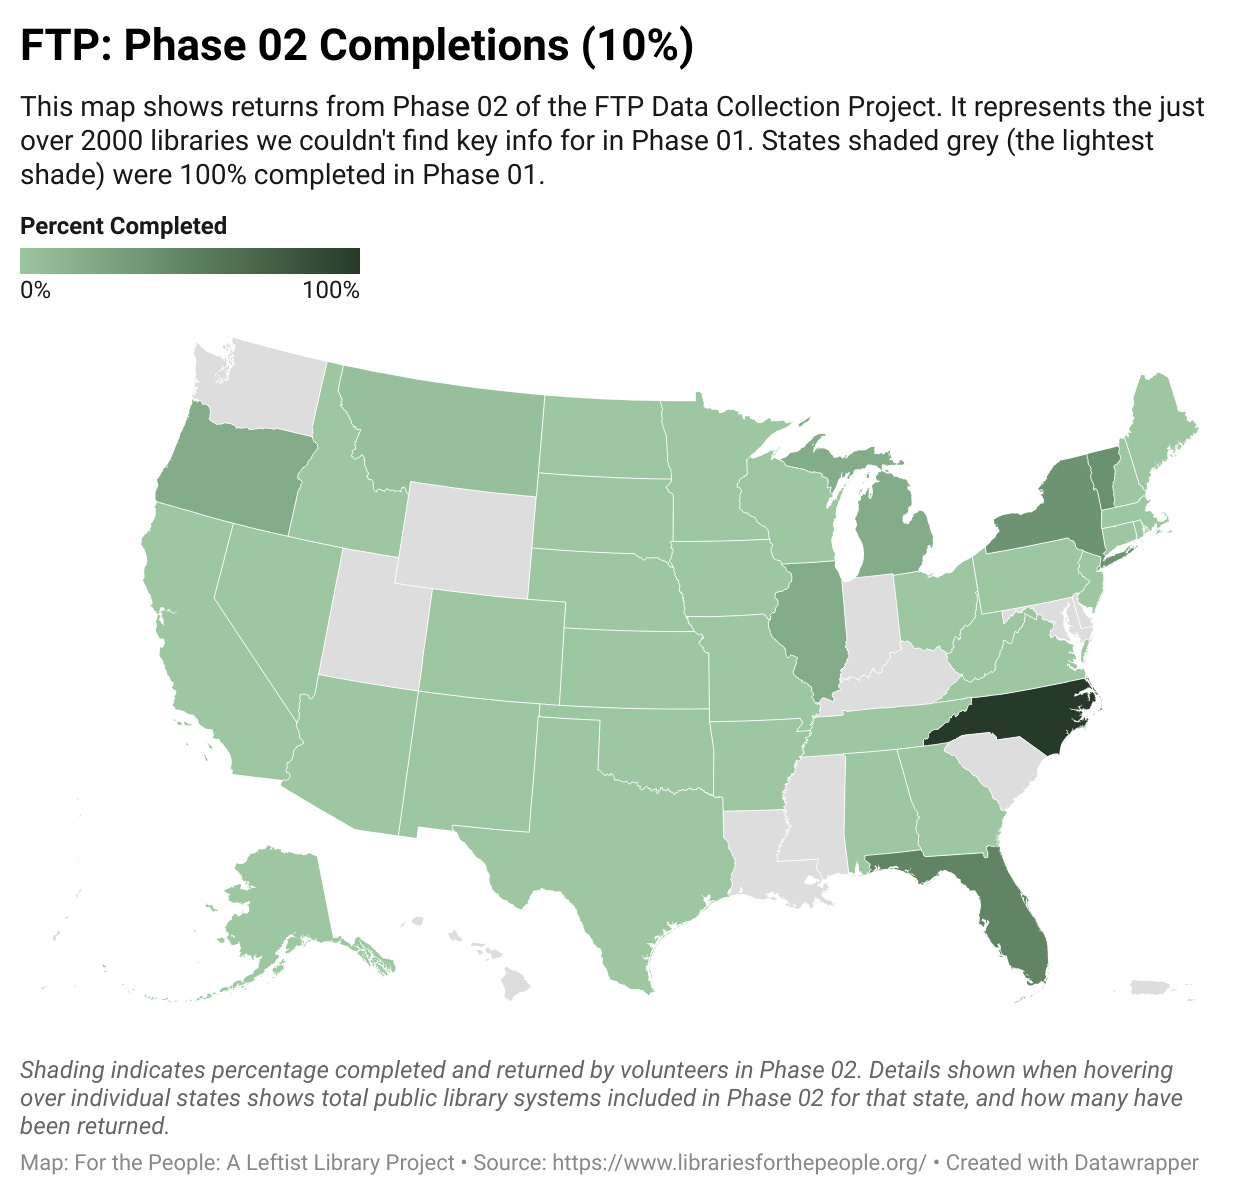 Alt text: A map of the United States with shading/coloring that indicates what percentage of each individual state has been checked out and then returned (i.e. completed) in Phase 02 of FTP's Data Collection project.  It represents the just over 2000 libraries we couldn't find key info for in Phase 01. States shaded grey (the lightest shade) were 100% completed in Phase 01.  The data source is available in Google sheets here: https://docs.google.com/spreadsheets/d/1FXMedHxfX2JlAaz0dERyTcvriMXydS6KkAK601vGU-s/edit#gid=0